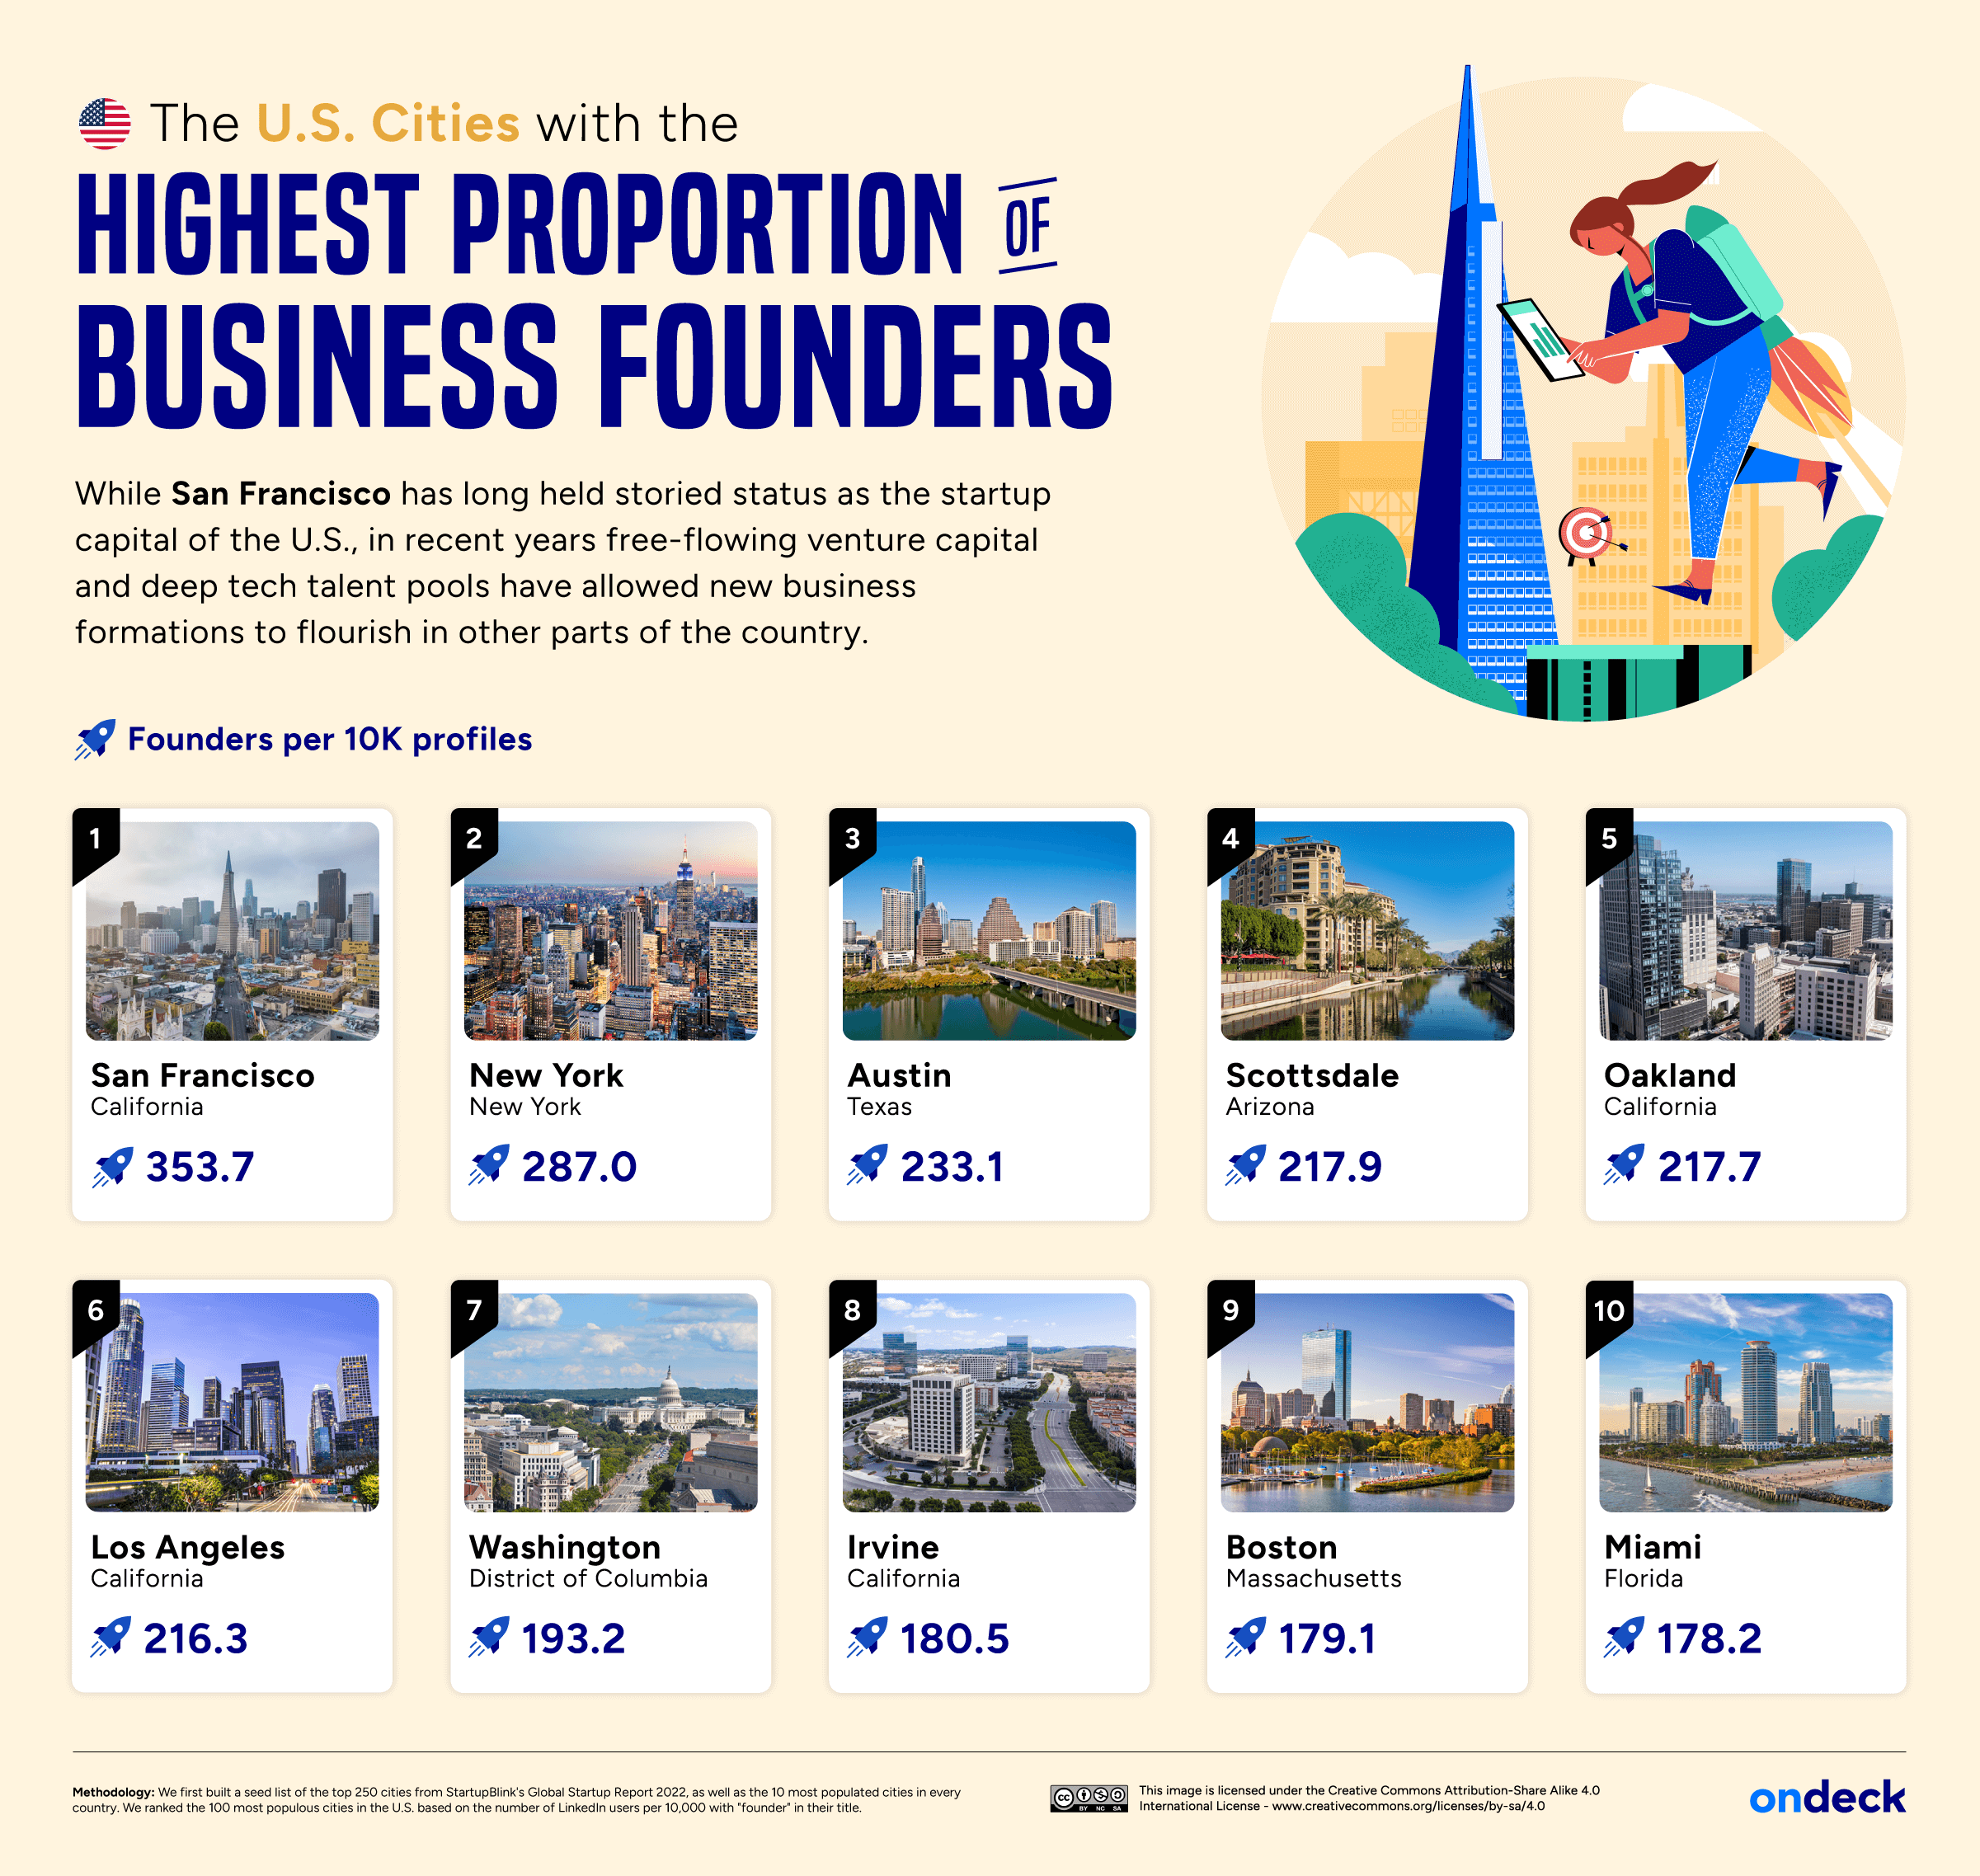 Infographic showing the U.S. cities with the most business founders